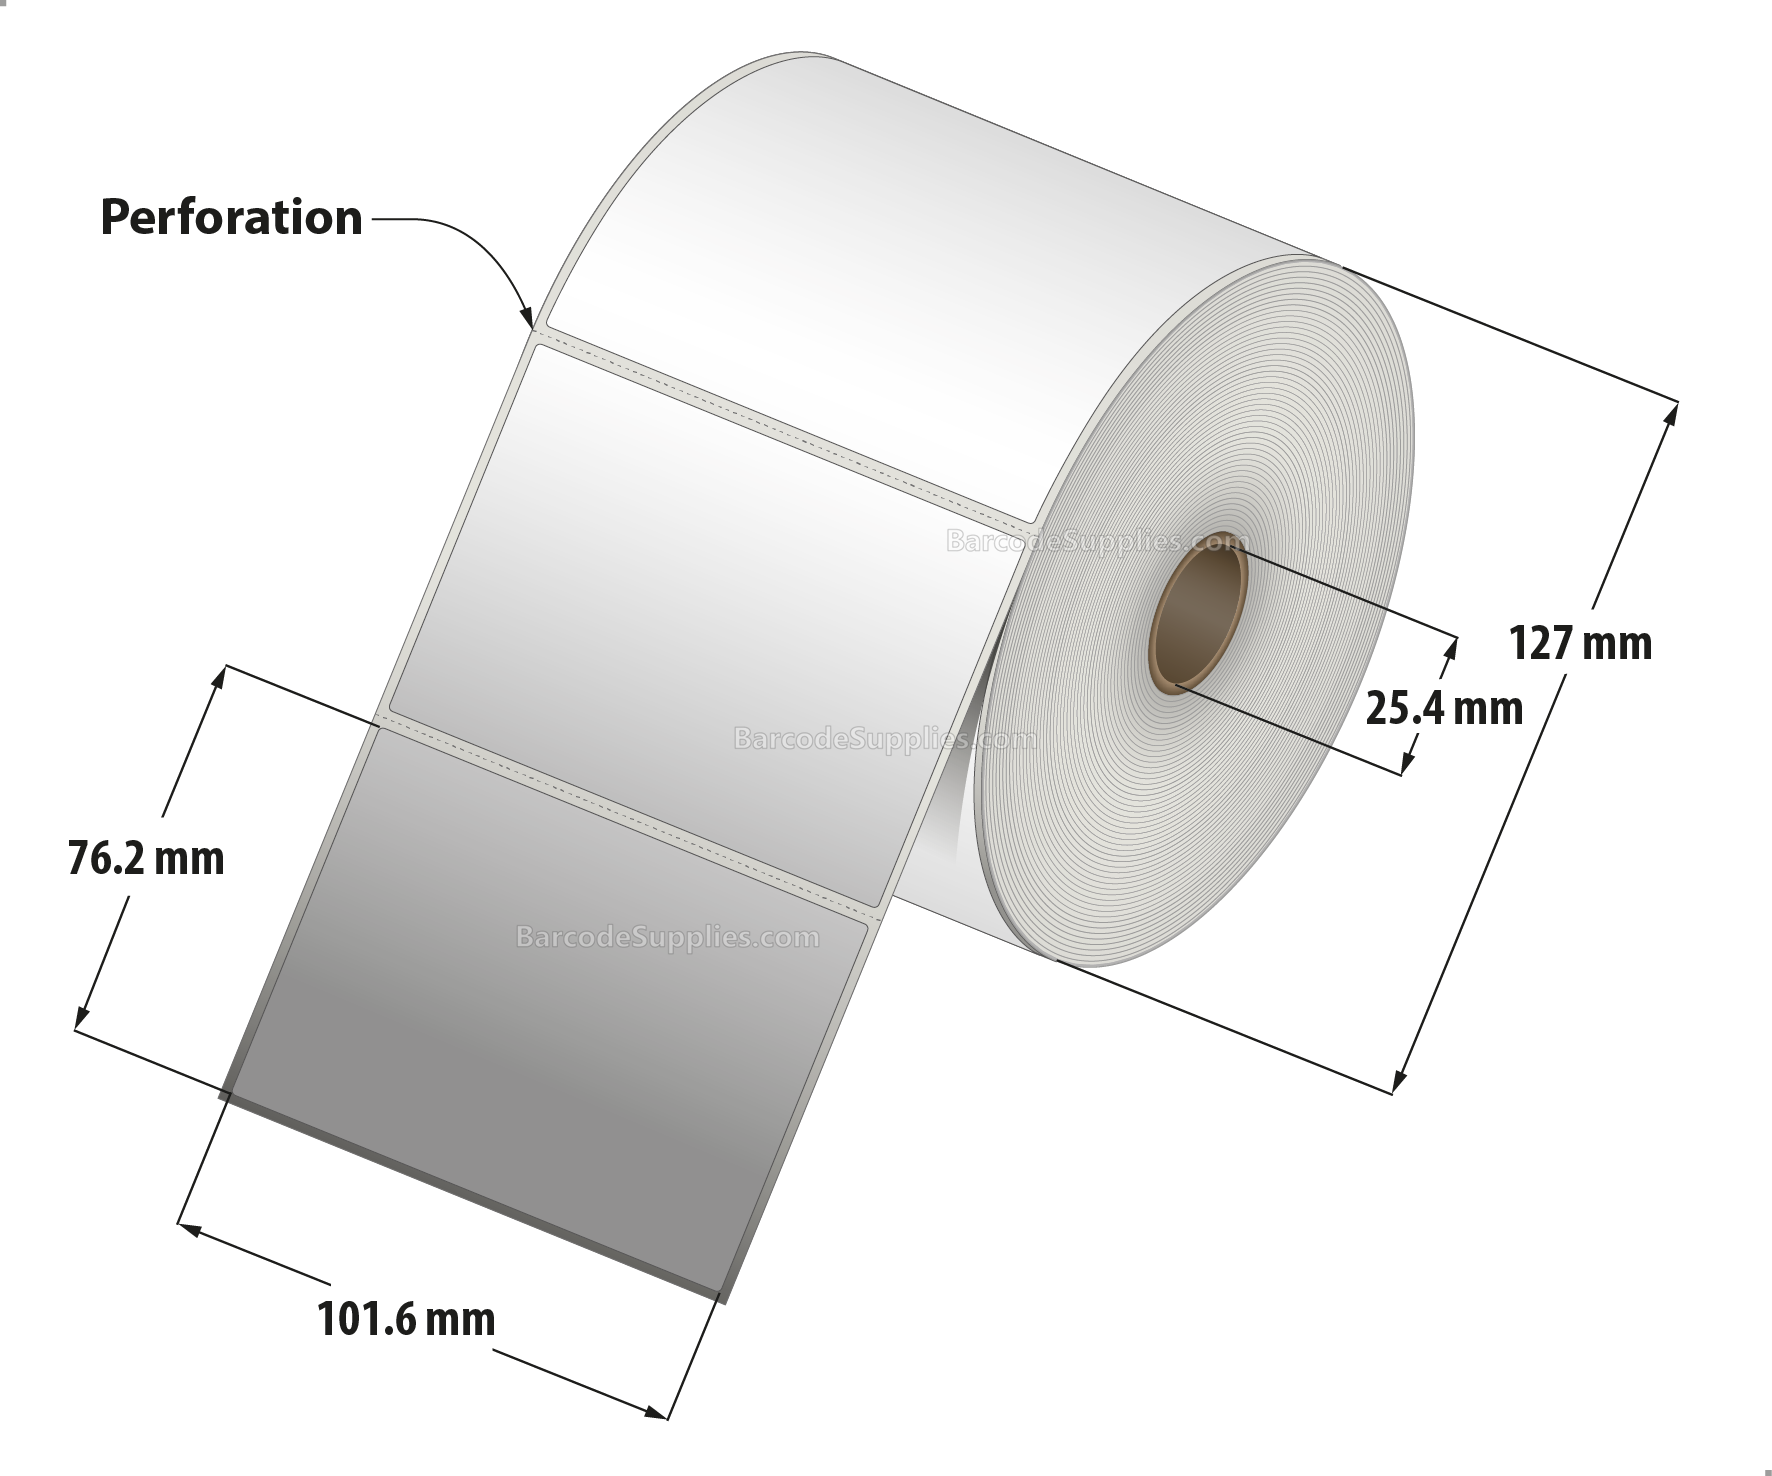 4 x 3 Thermal Transfer White Labels With Rubber Adhesive - Perforated - 840 Labels Per Roll - Carton Of 12 Rolls - 10080 Labels Total - MPN: RTT5-400300-1P